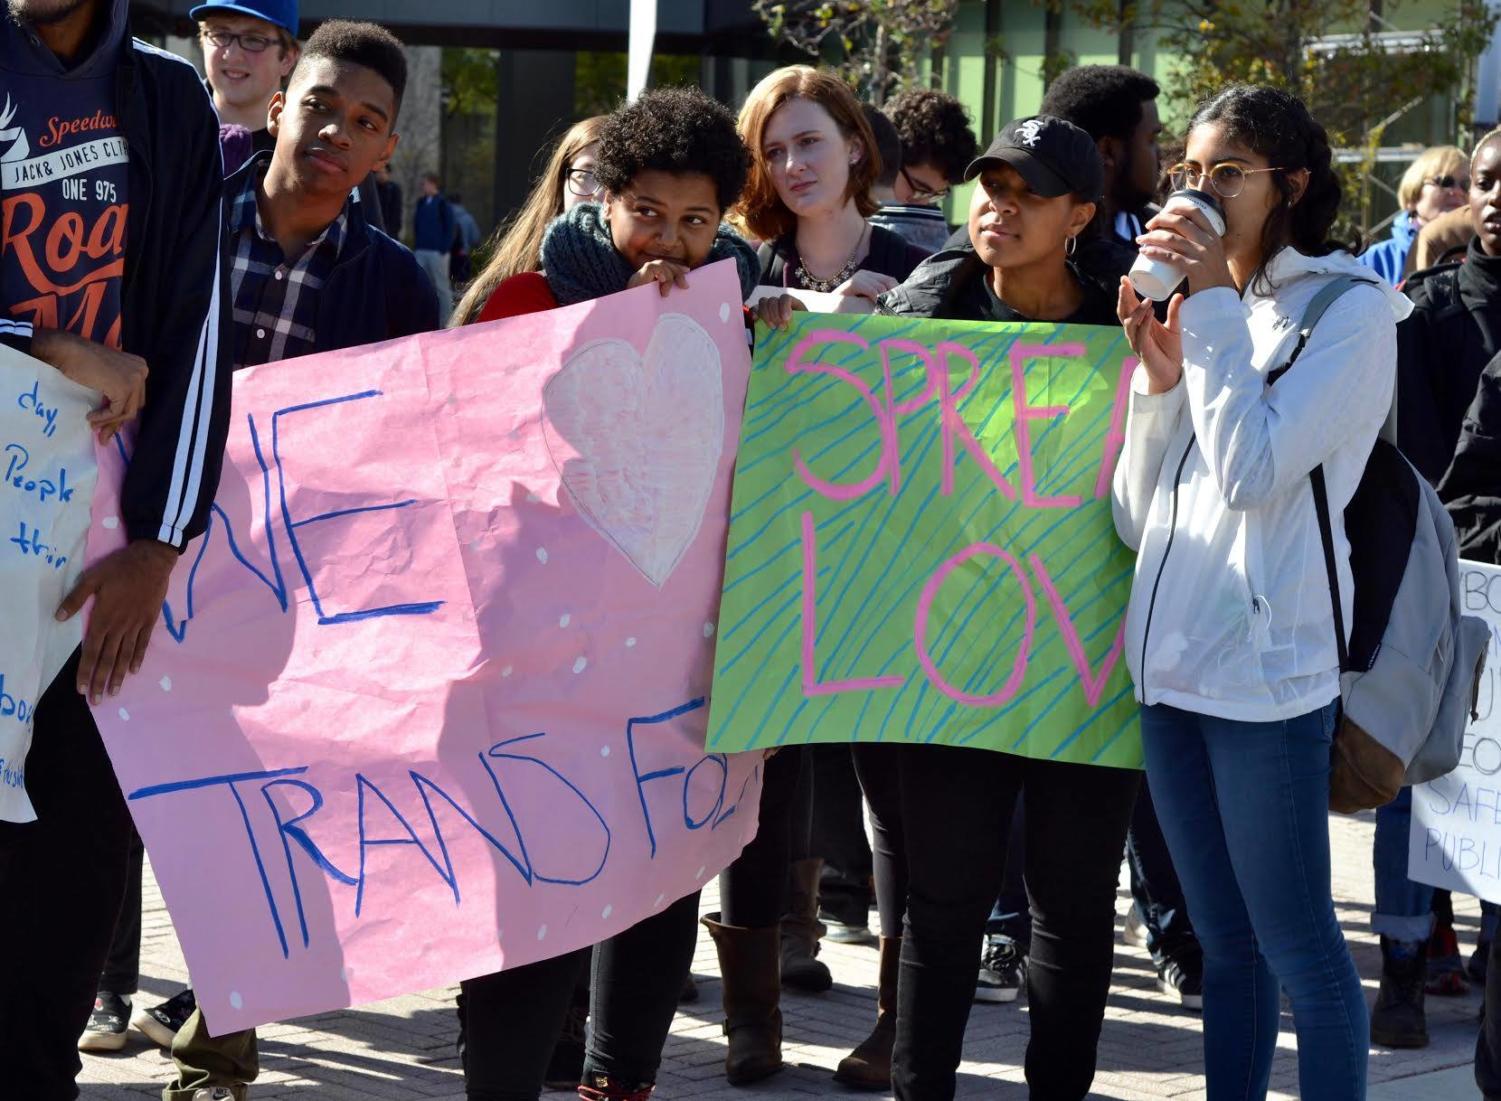 Students huddle in front of Campus North holding signs to counterprotest the Westboro Church picket.